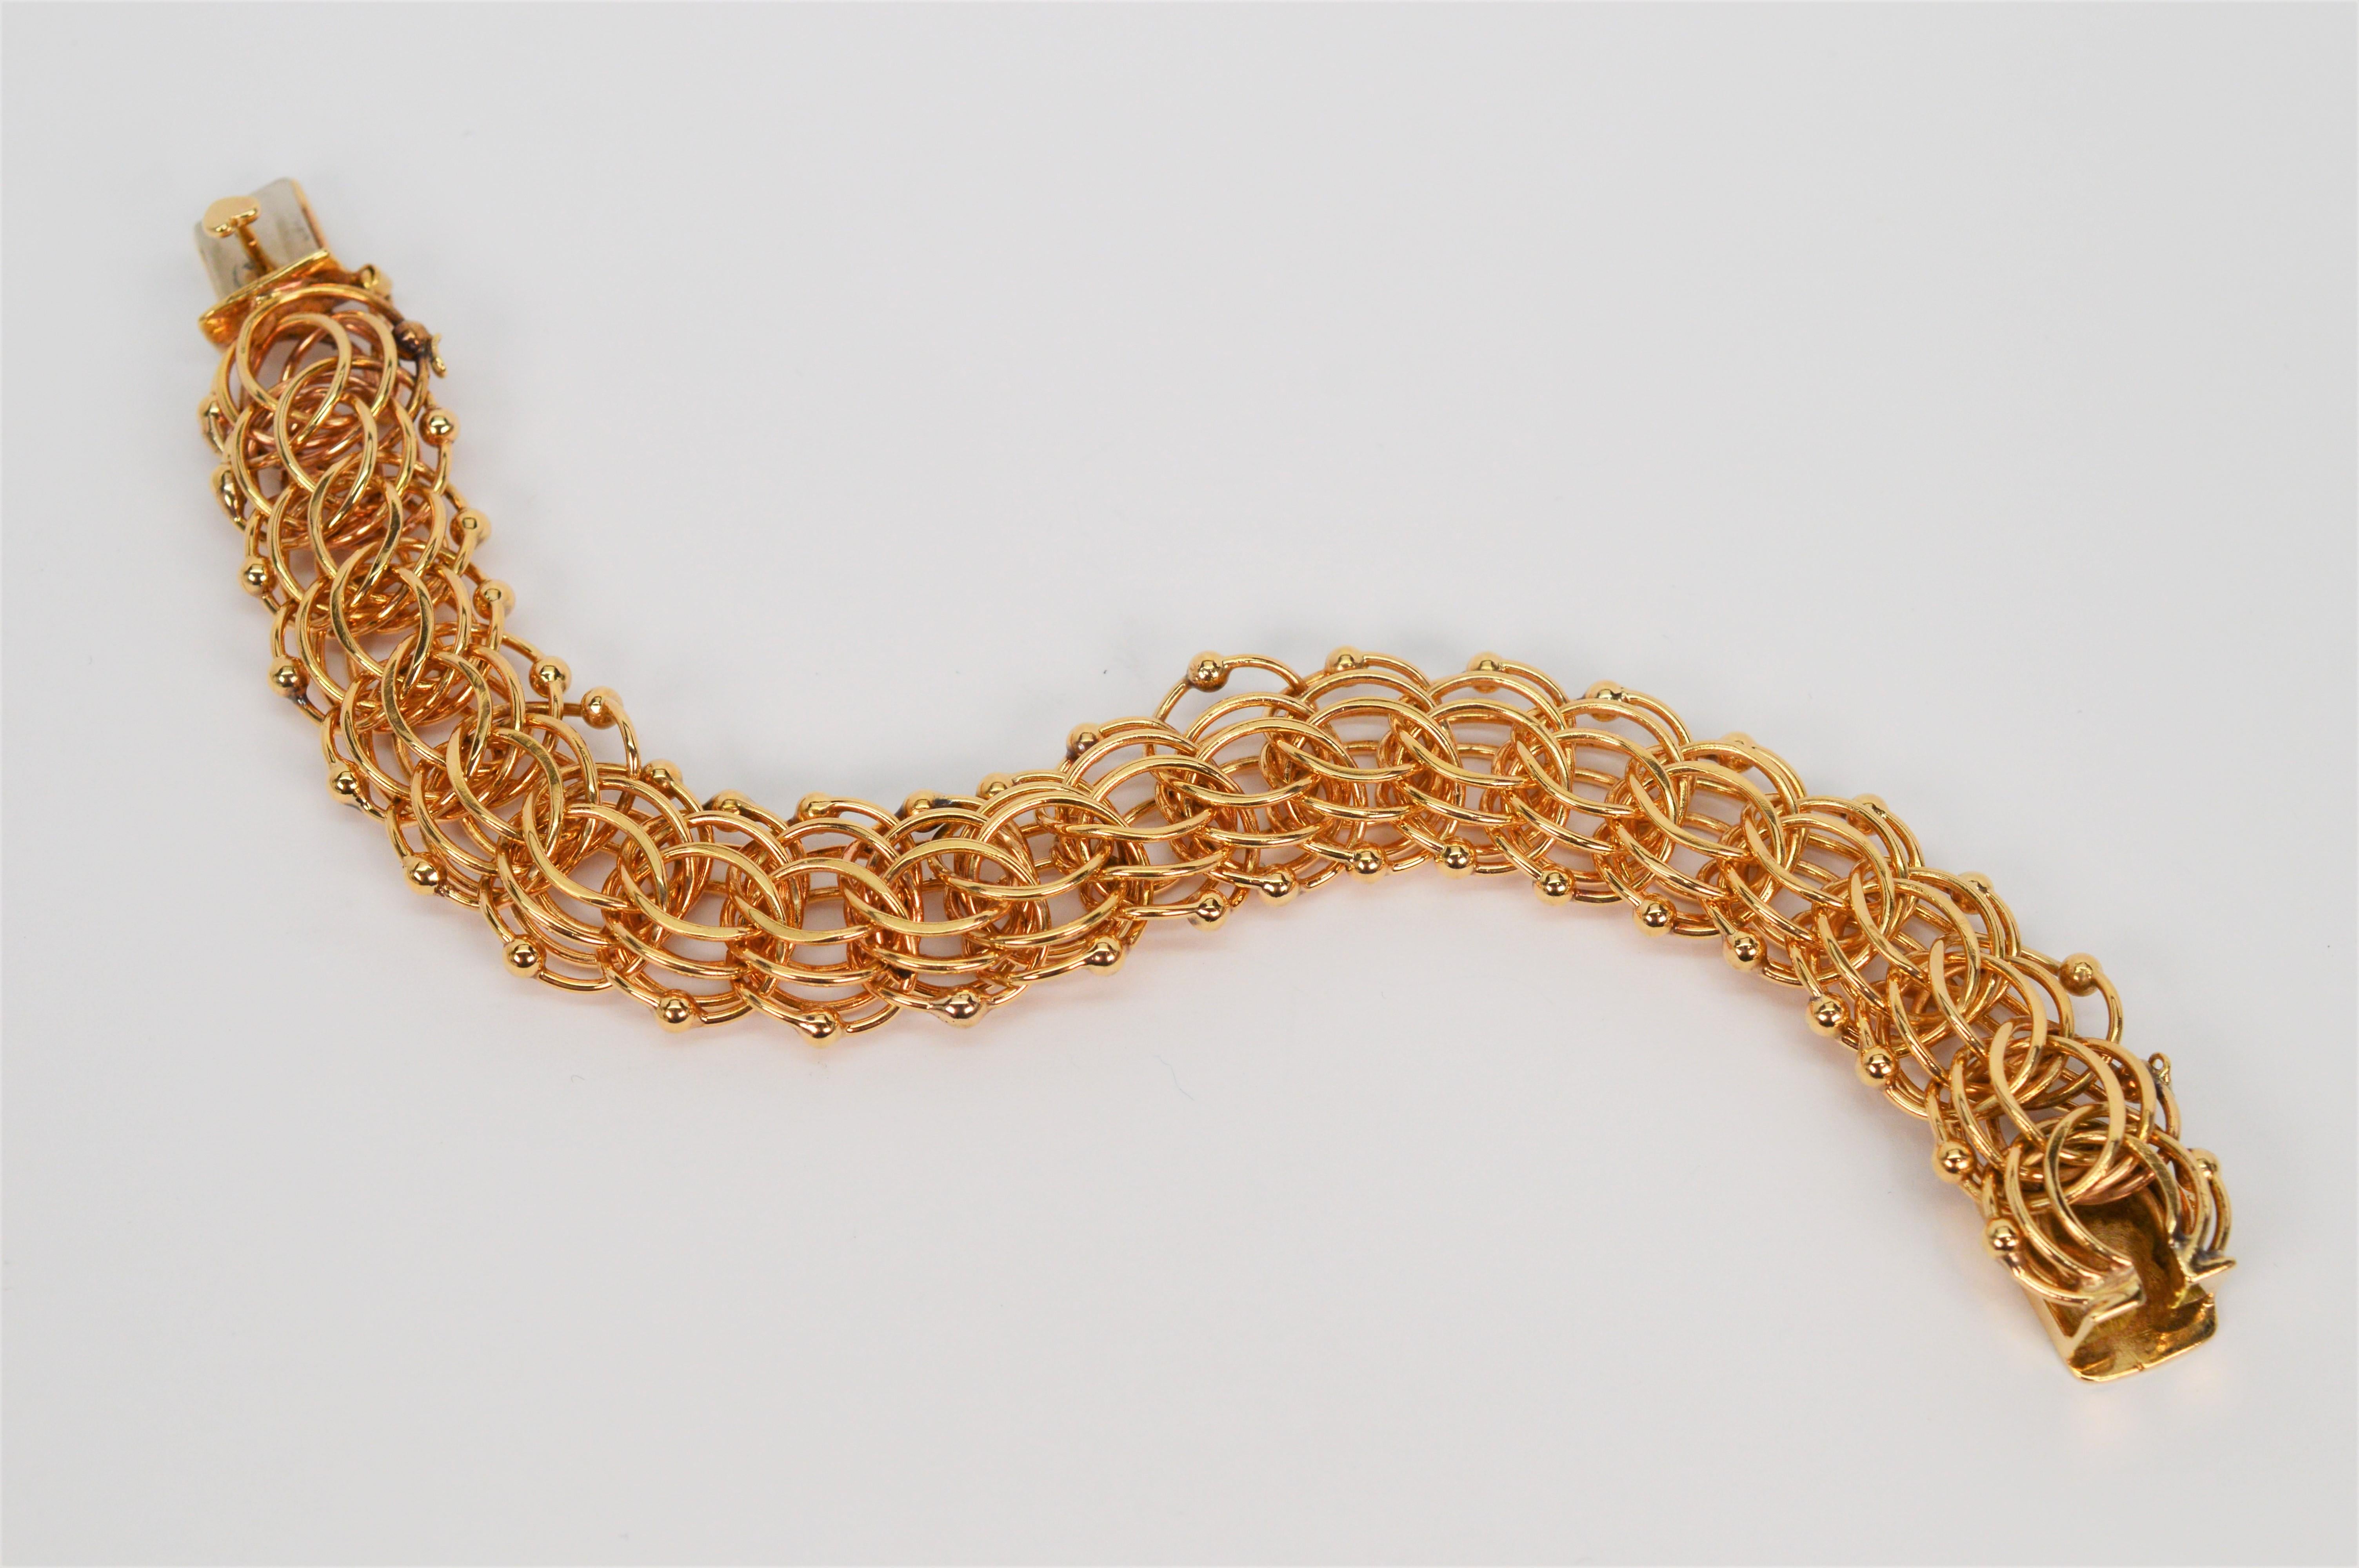 Triple Woven Link Retro 14 Karat Yellow Gold Charm Bracelet In Excellent Condition For Sale In Mount Kisco, NY